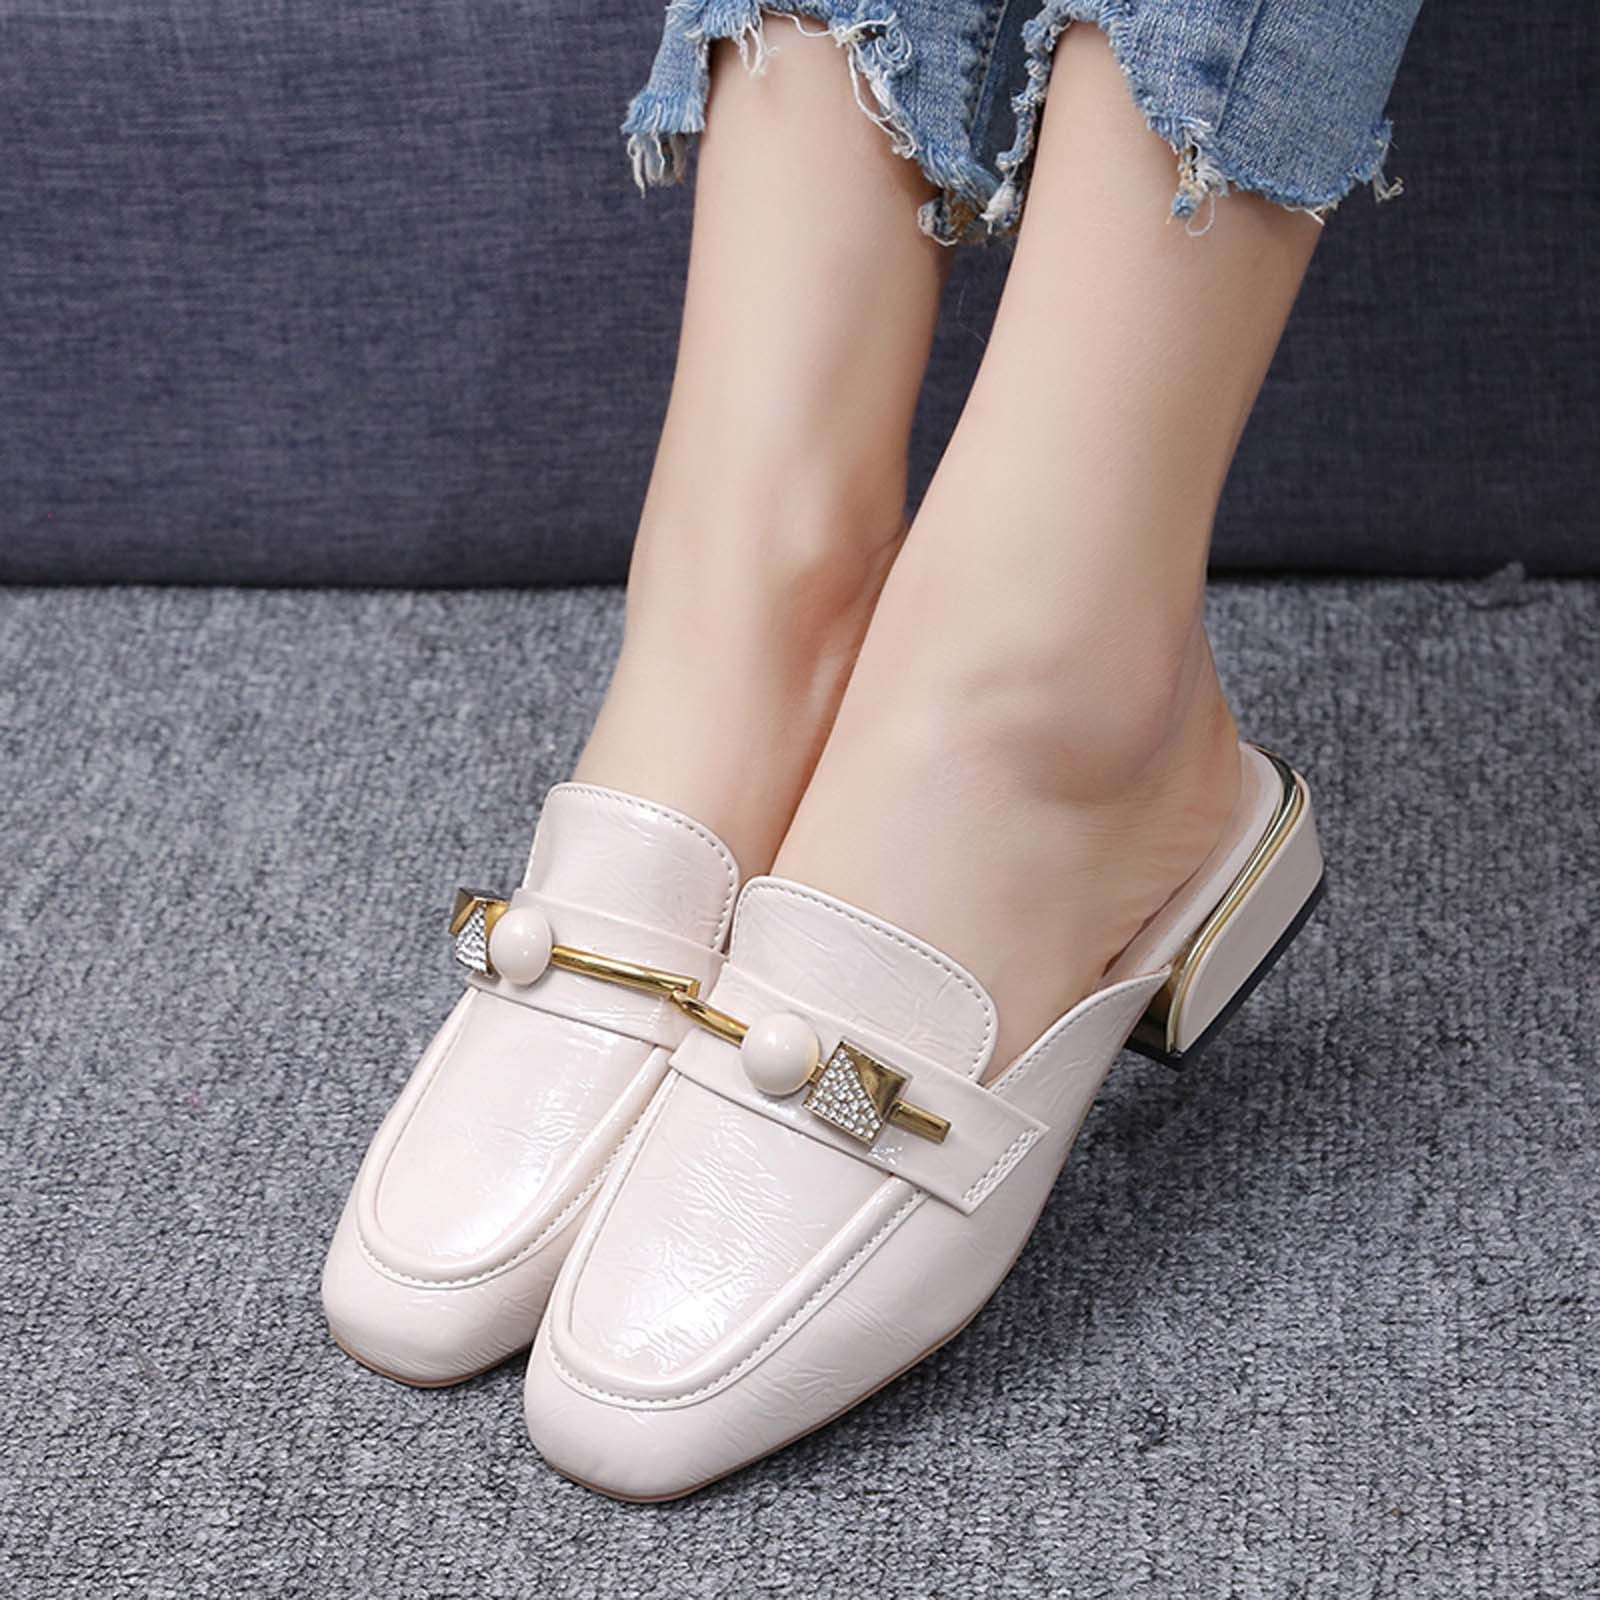 Womens Mules Flats Square Head Toe Backless Loafers Slip On Slides Sandals Women's Shoes under $30 - Walmart.com